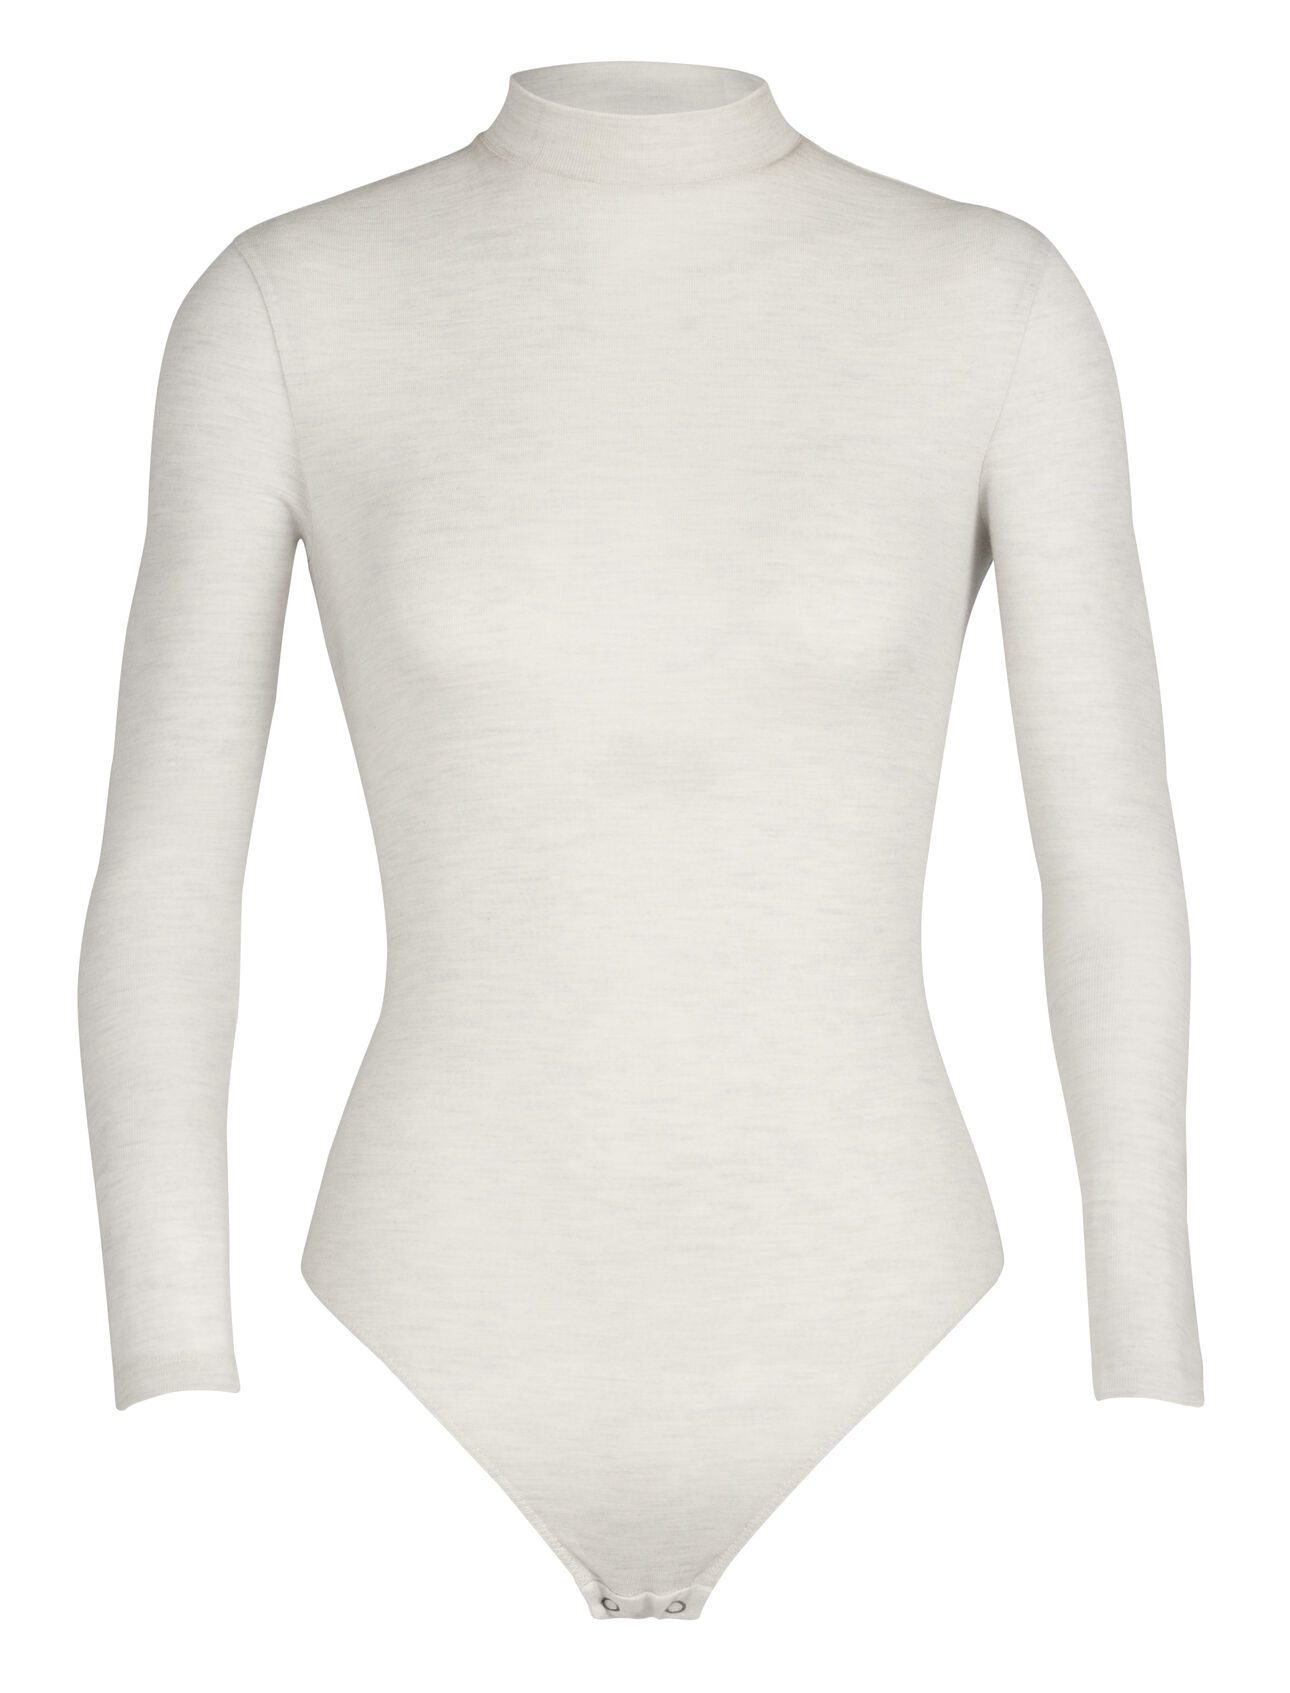 Womens Merino Rib Long Sleeve High Neck Body A versatile bodysuit that functions as a top or a base layer, the Merino Rib Long Sleeve High Neck Body features 100% soft, breathable and naturally odor resistant merino wool.